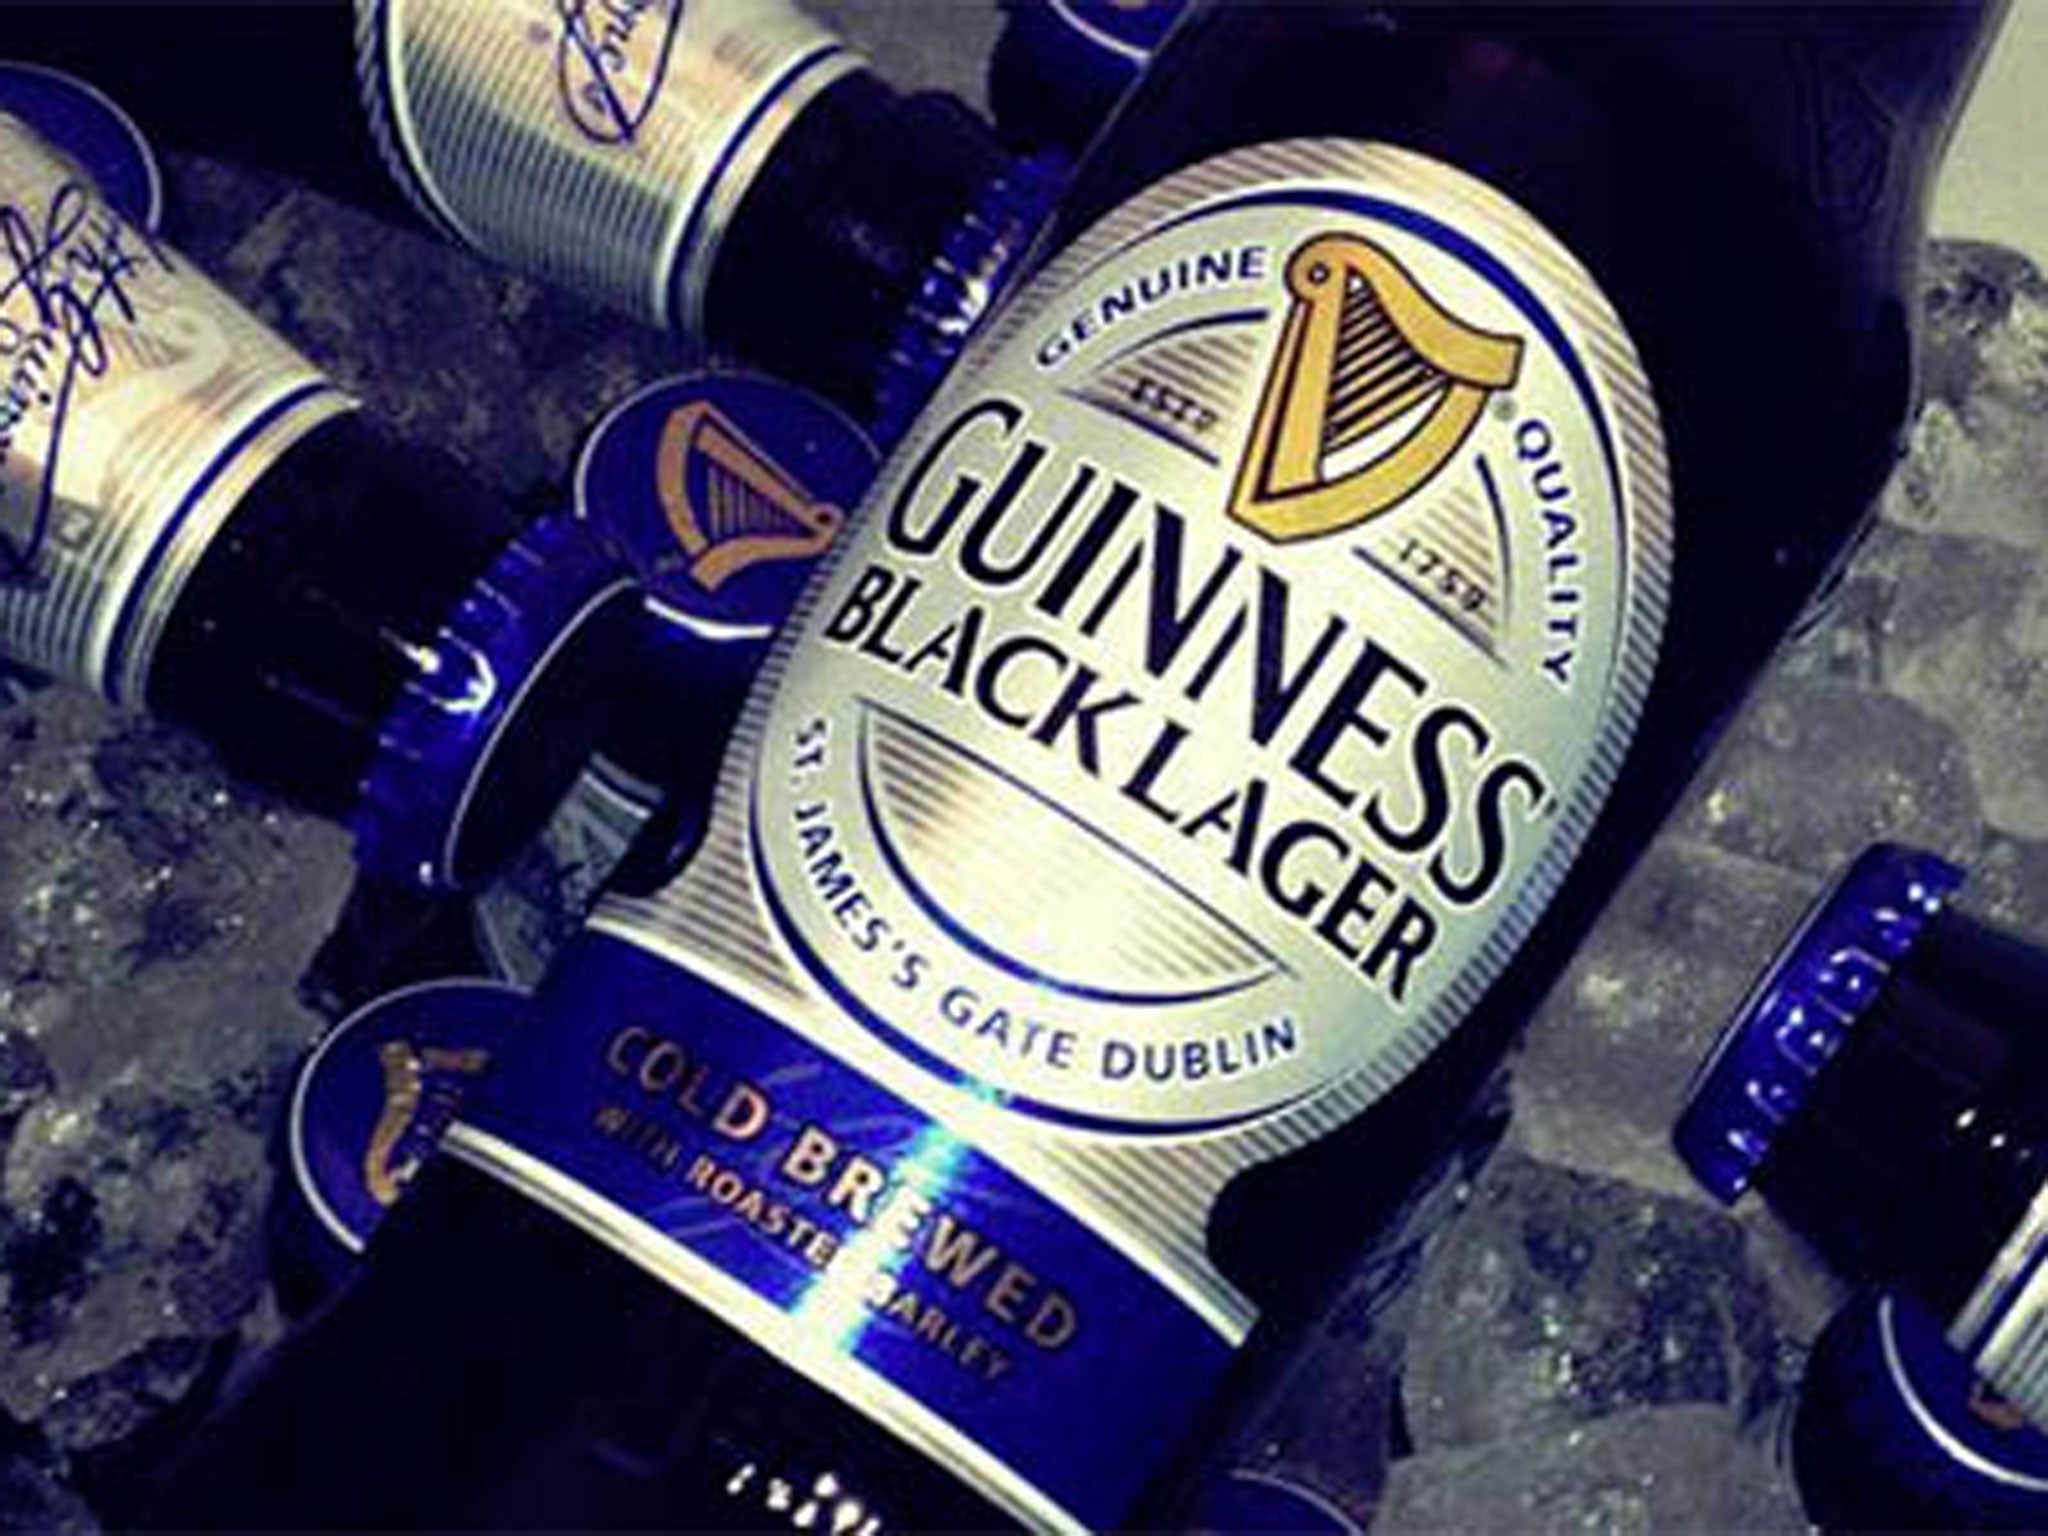 Guinness Black Lager was launched in the US in August 2011 and in Ireland last year but sales have been “disappointing”